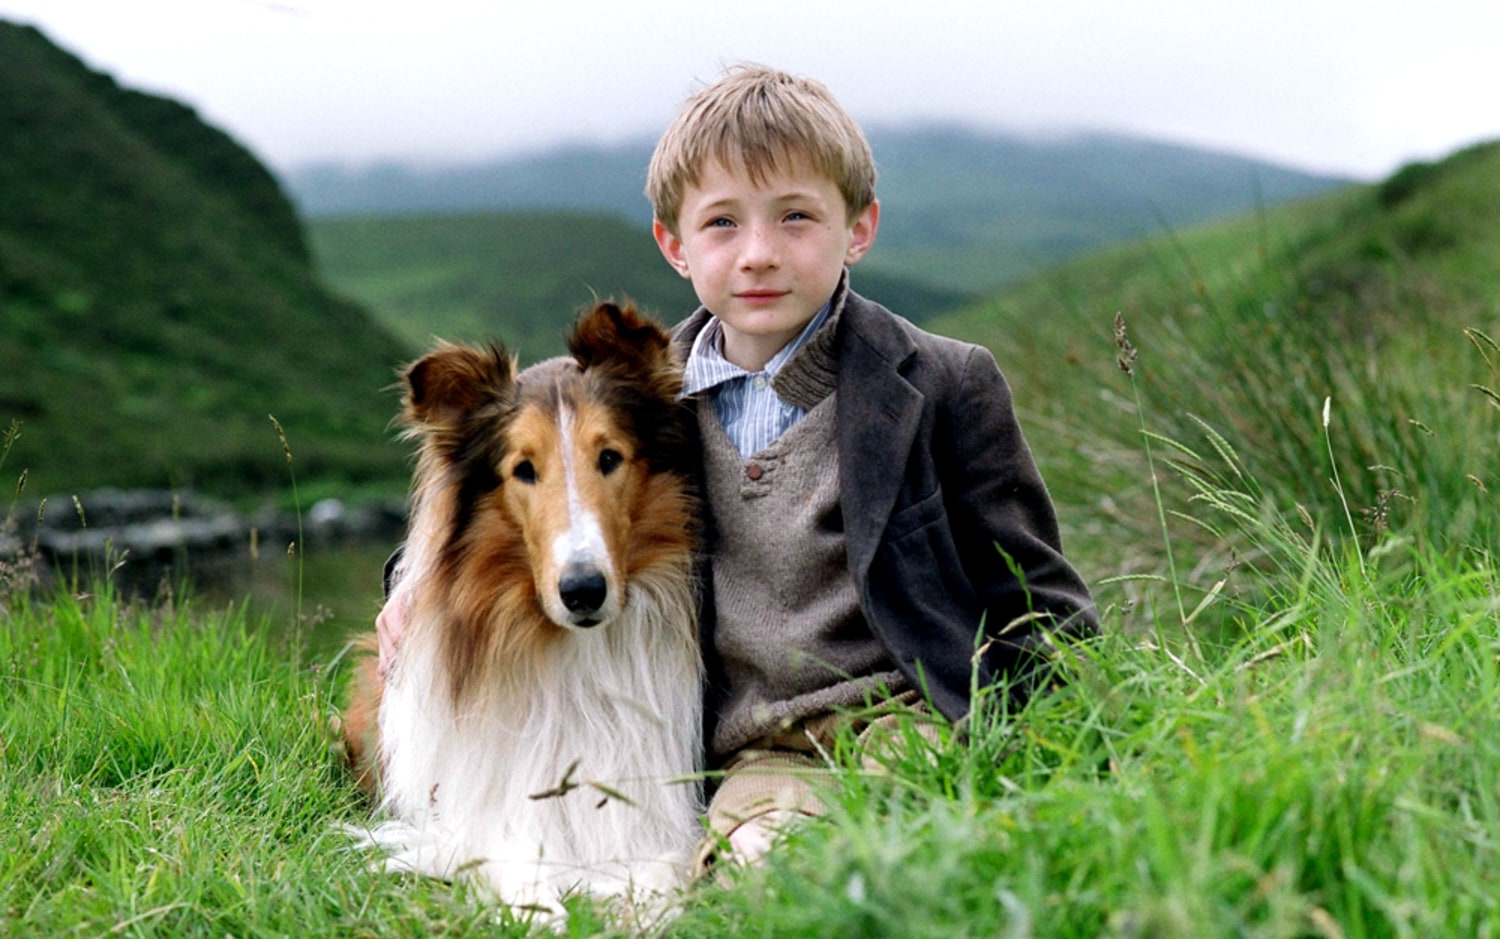 Lassie' makes a welcome return to movies